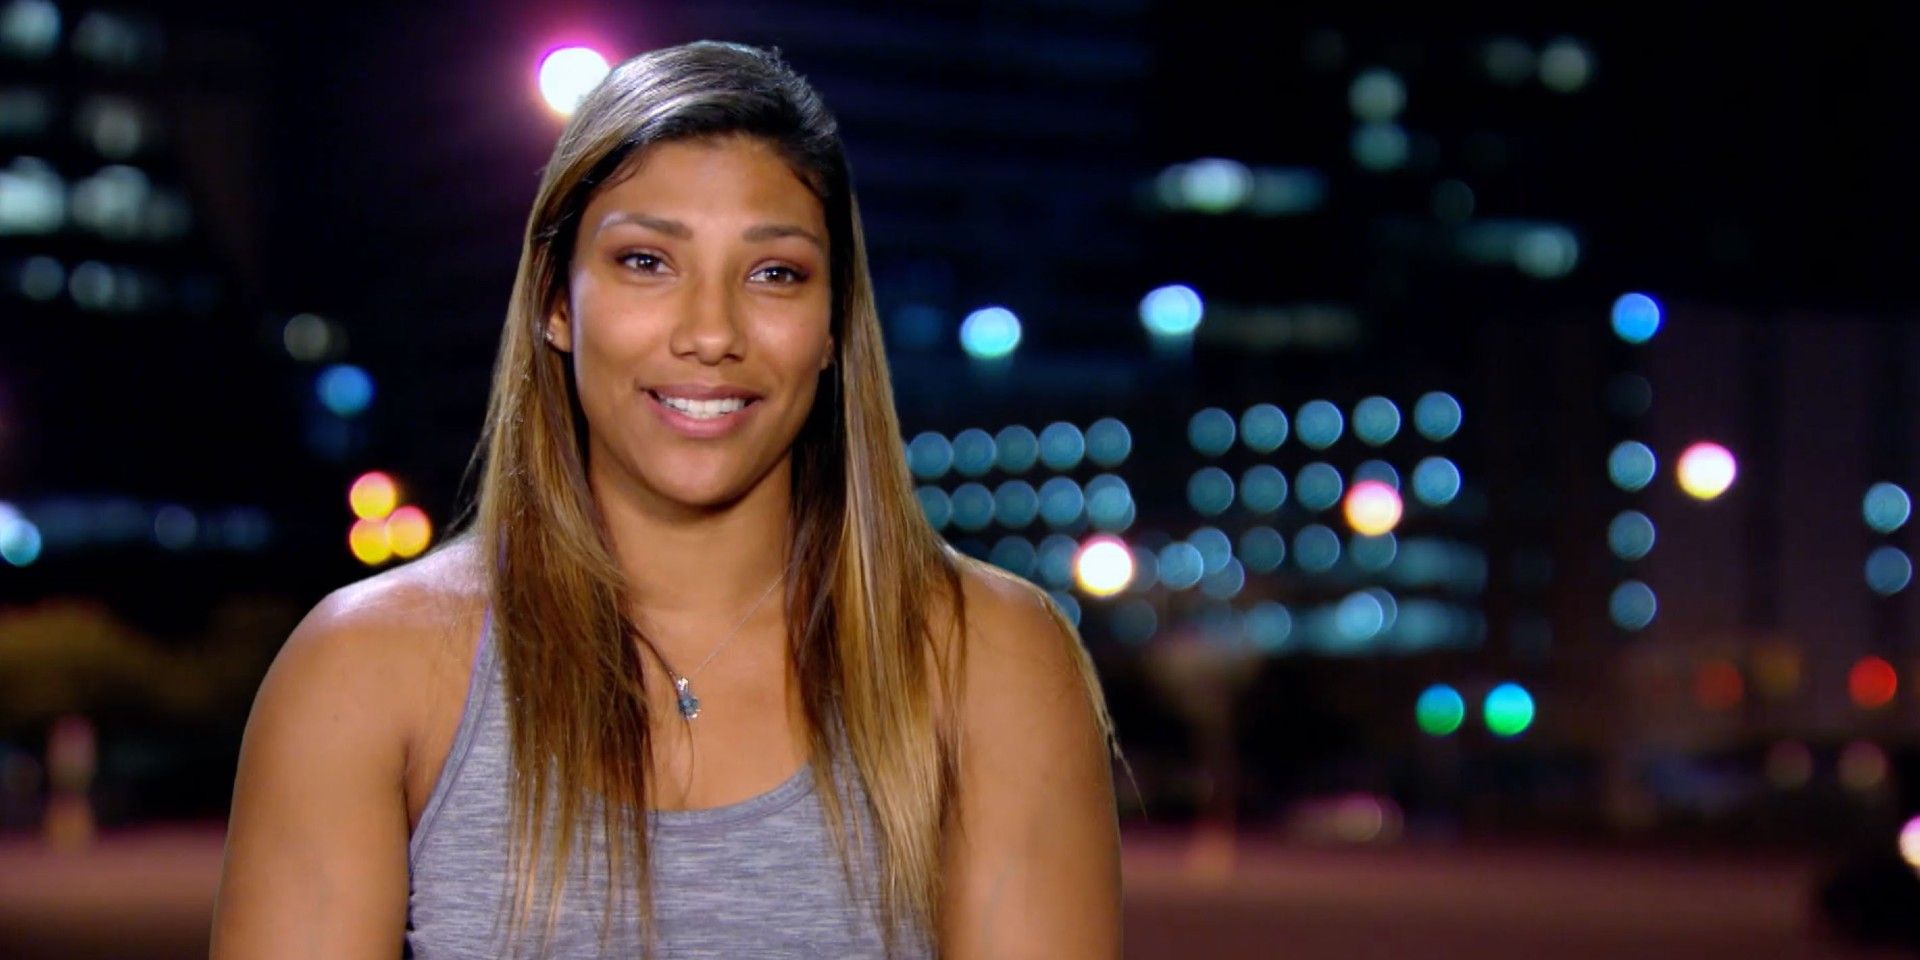 American Ninja Warrior All About Meagan Martin's Role In Tokyo Olympics